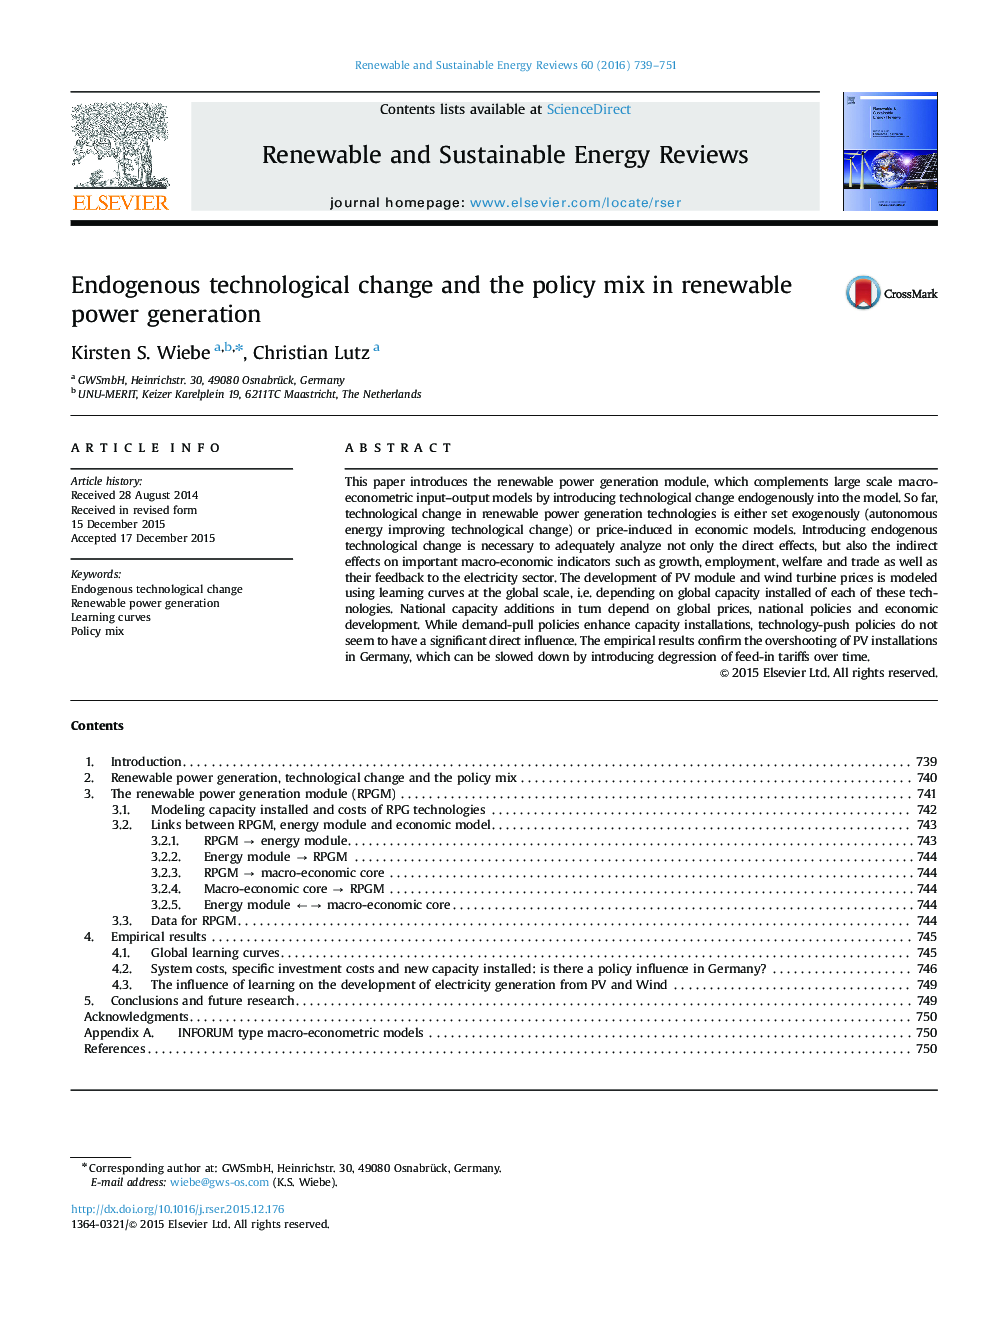 Endogenous technological change and the policy mix in renewable power generation